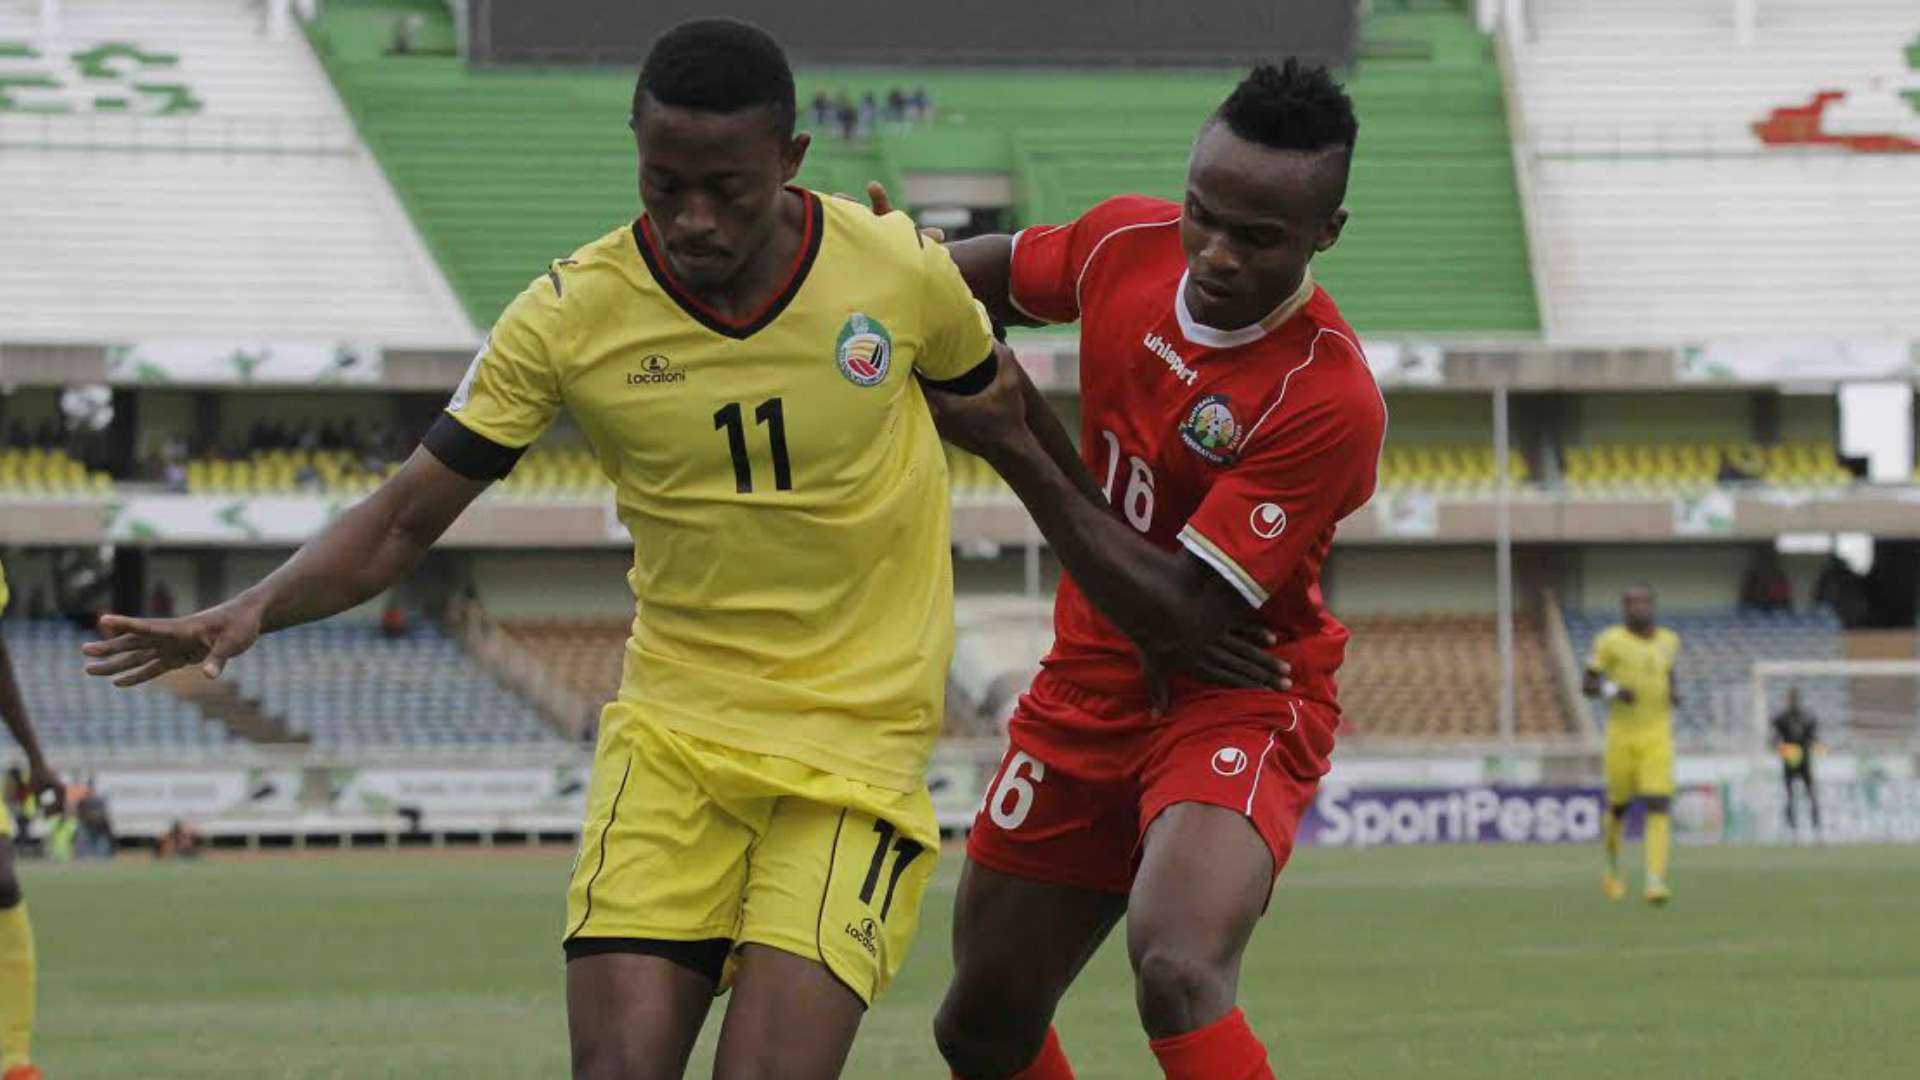 Harambee Stars midfielder Clifton Miheso delivered the cross scored by Erick Johanna